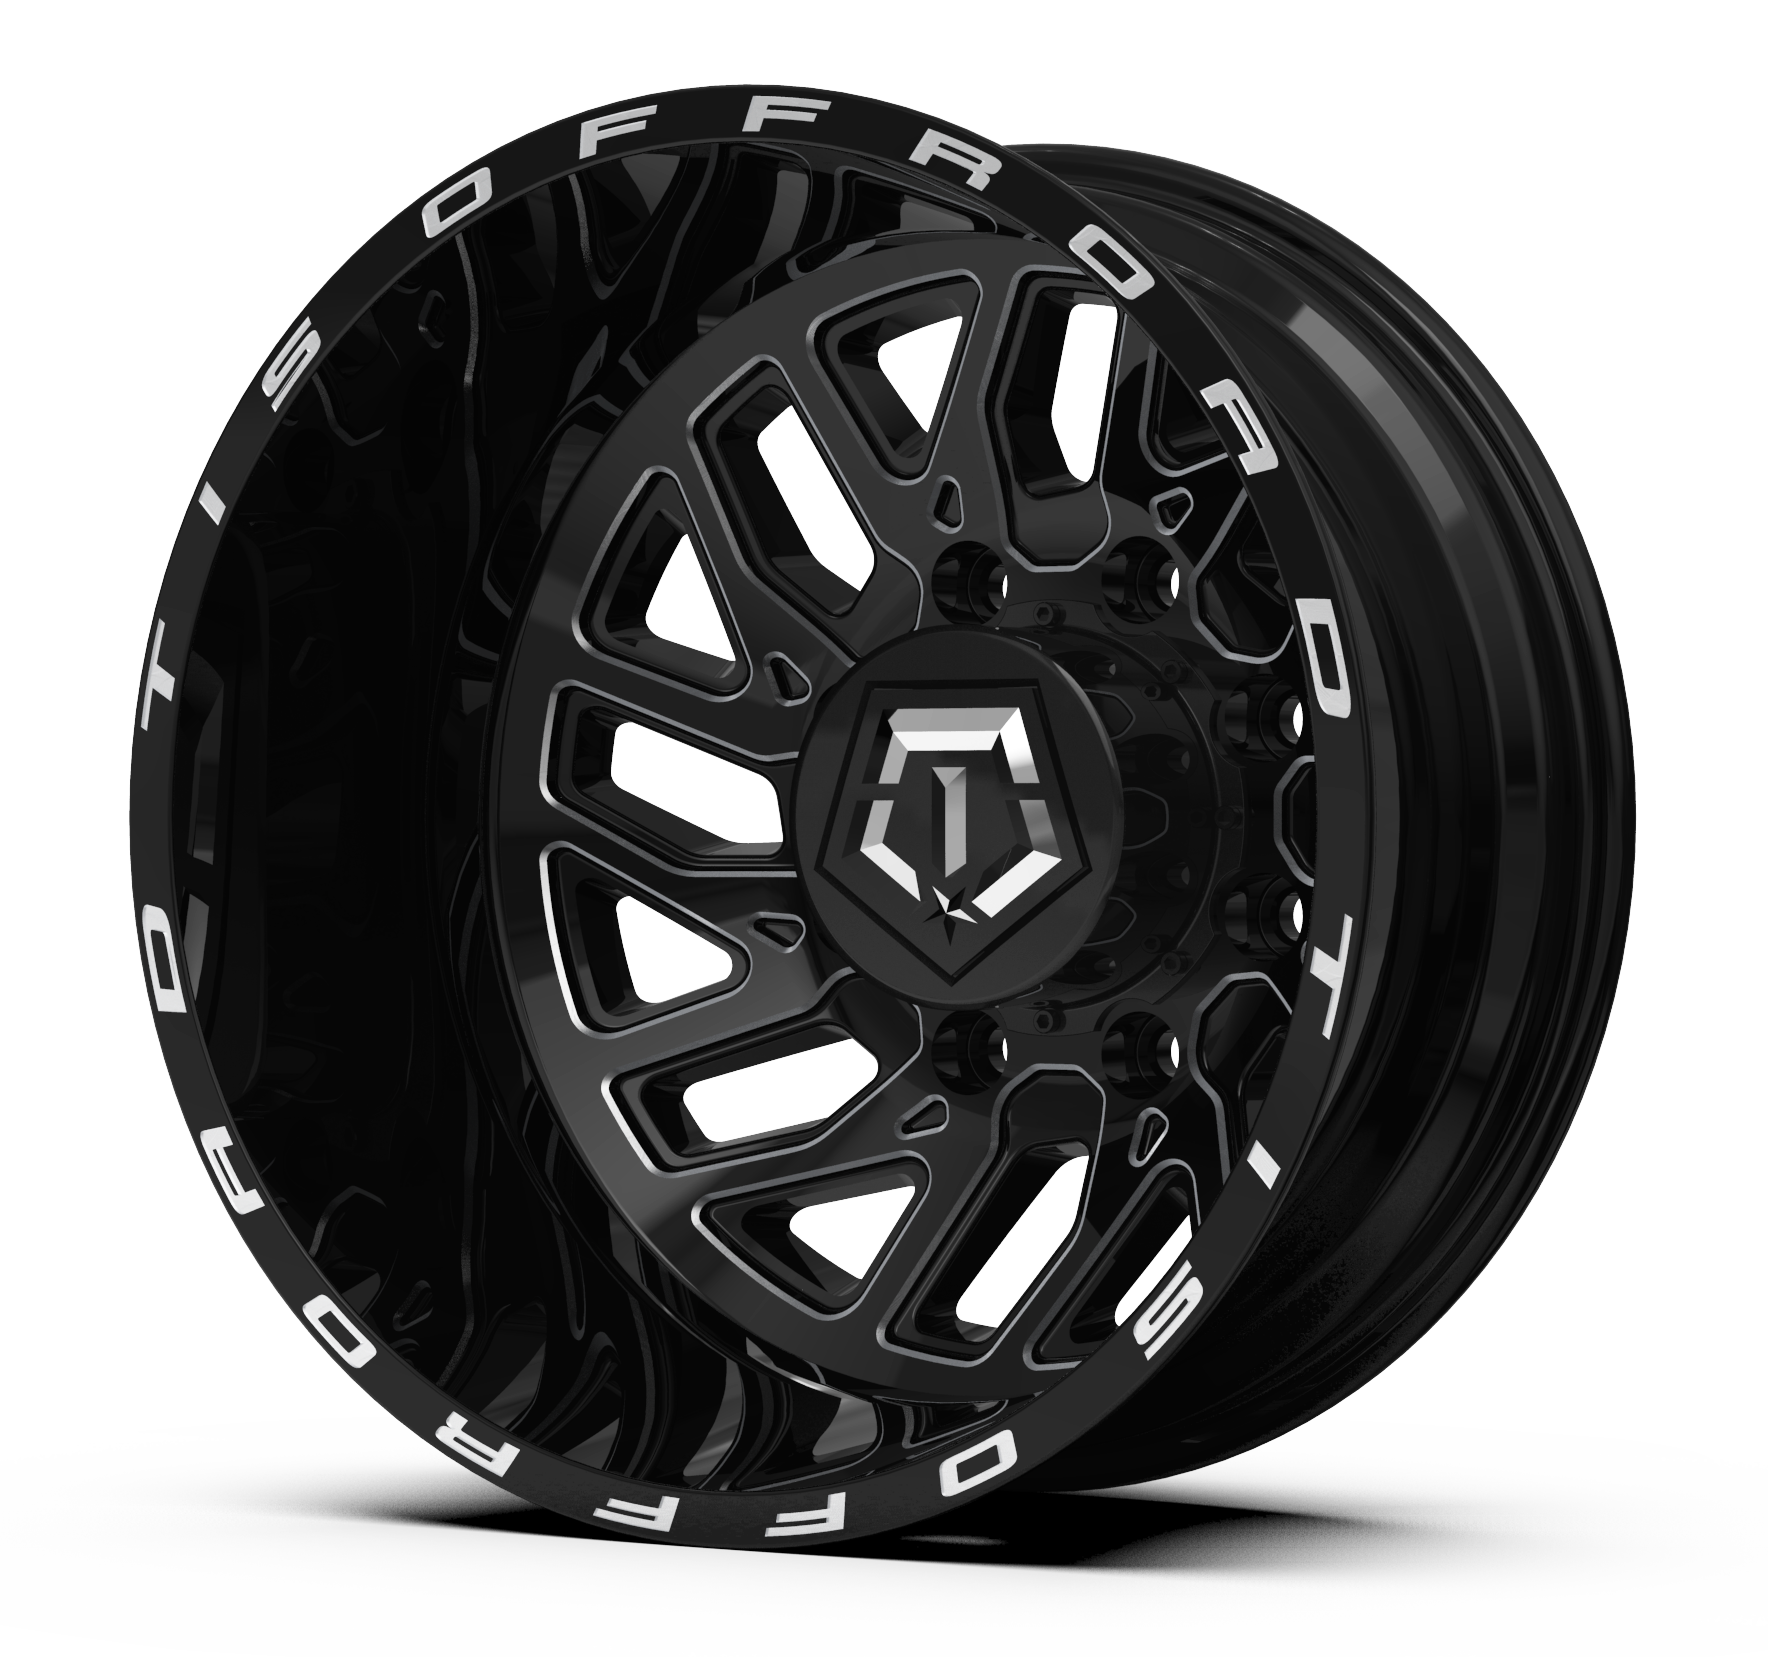 TIS 544BM Dually Wheels Gloss Black with CNC Milled Accents 5 and 6 lug